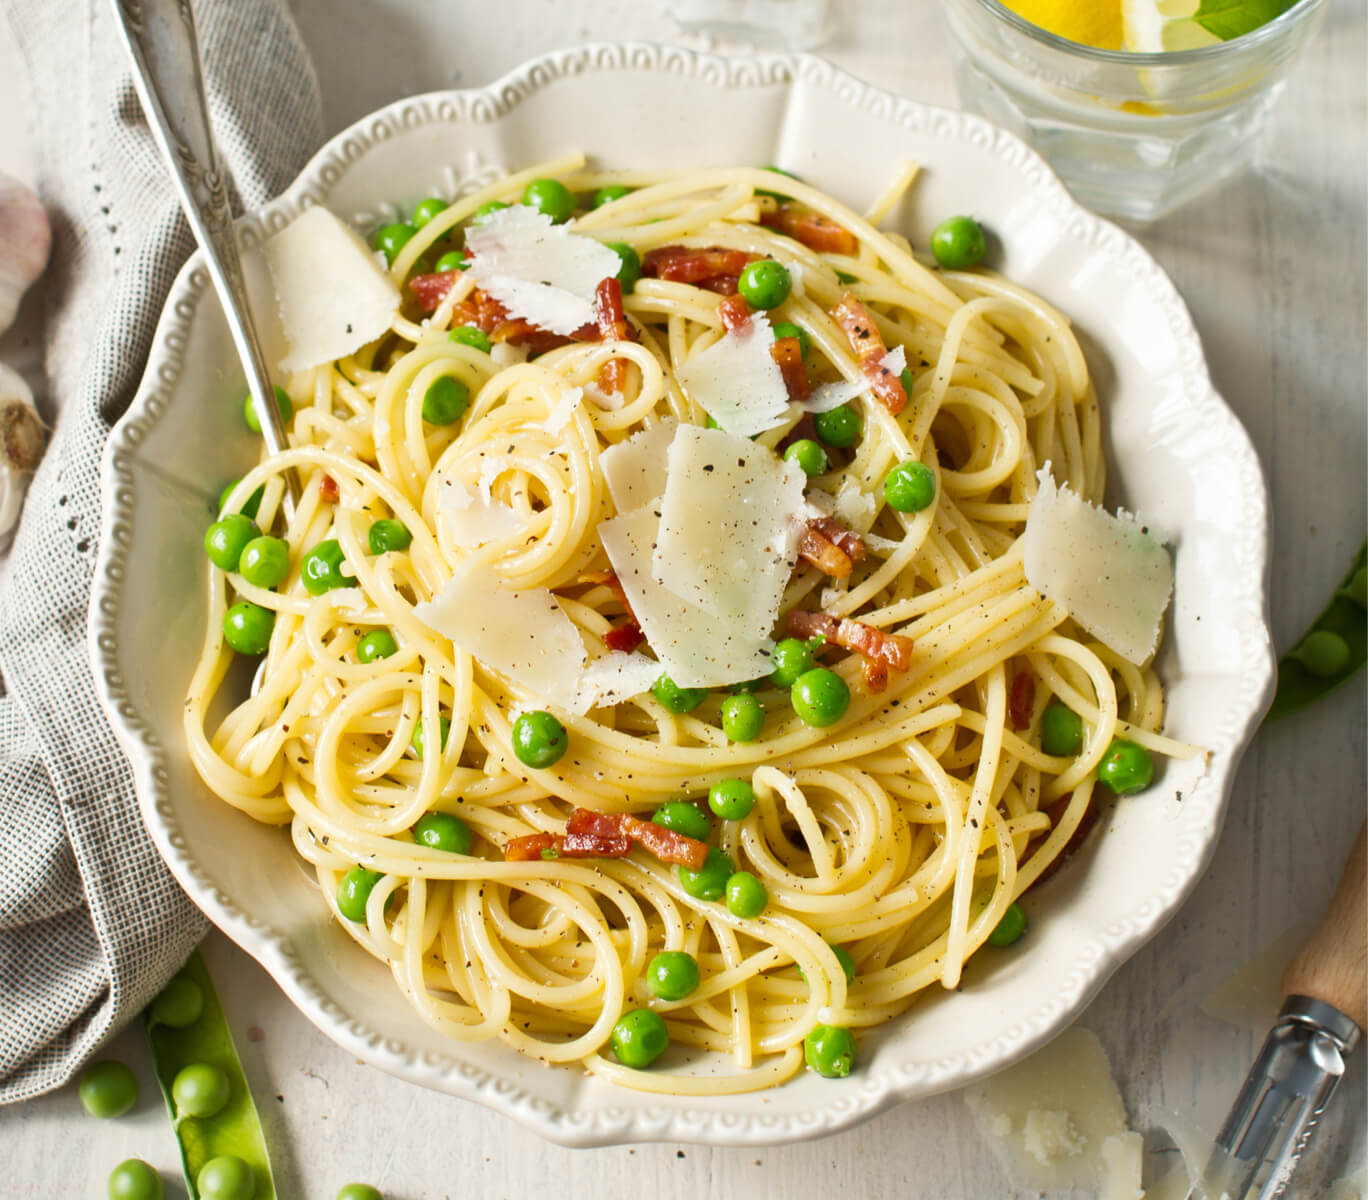 Ronzoni’s Spaghetti Carbonara with Peas in a bowl with utensils.